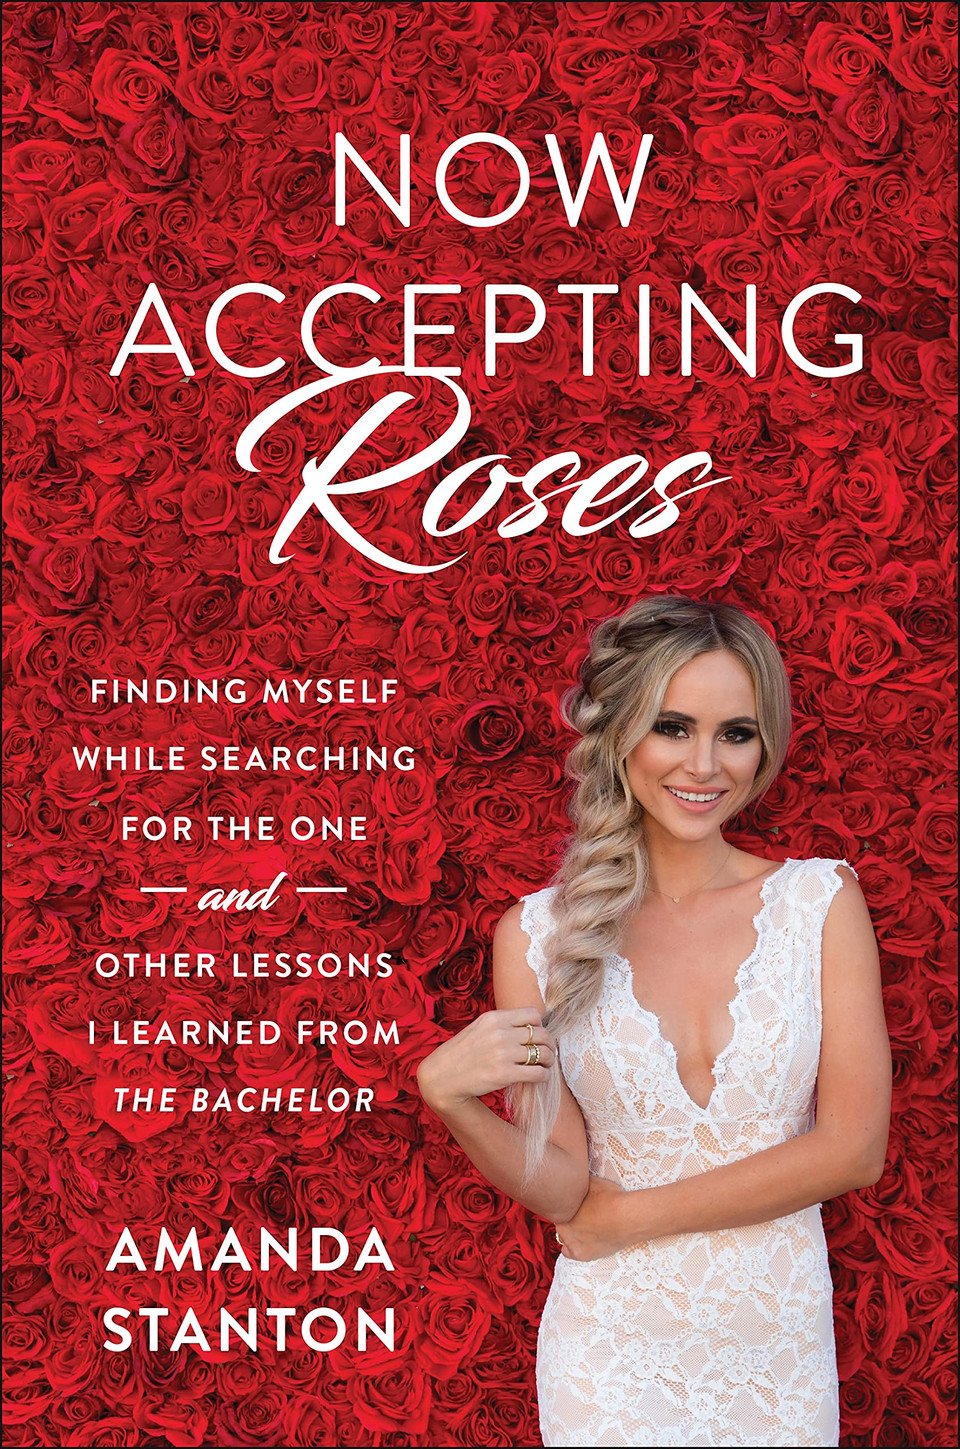 Now Accepting Roses: Finding Myself While Searching for the One . and Other Lessons I Learned from